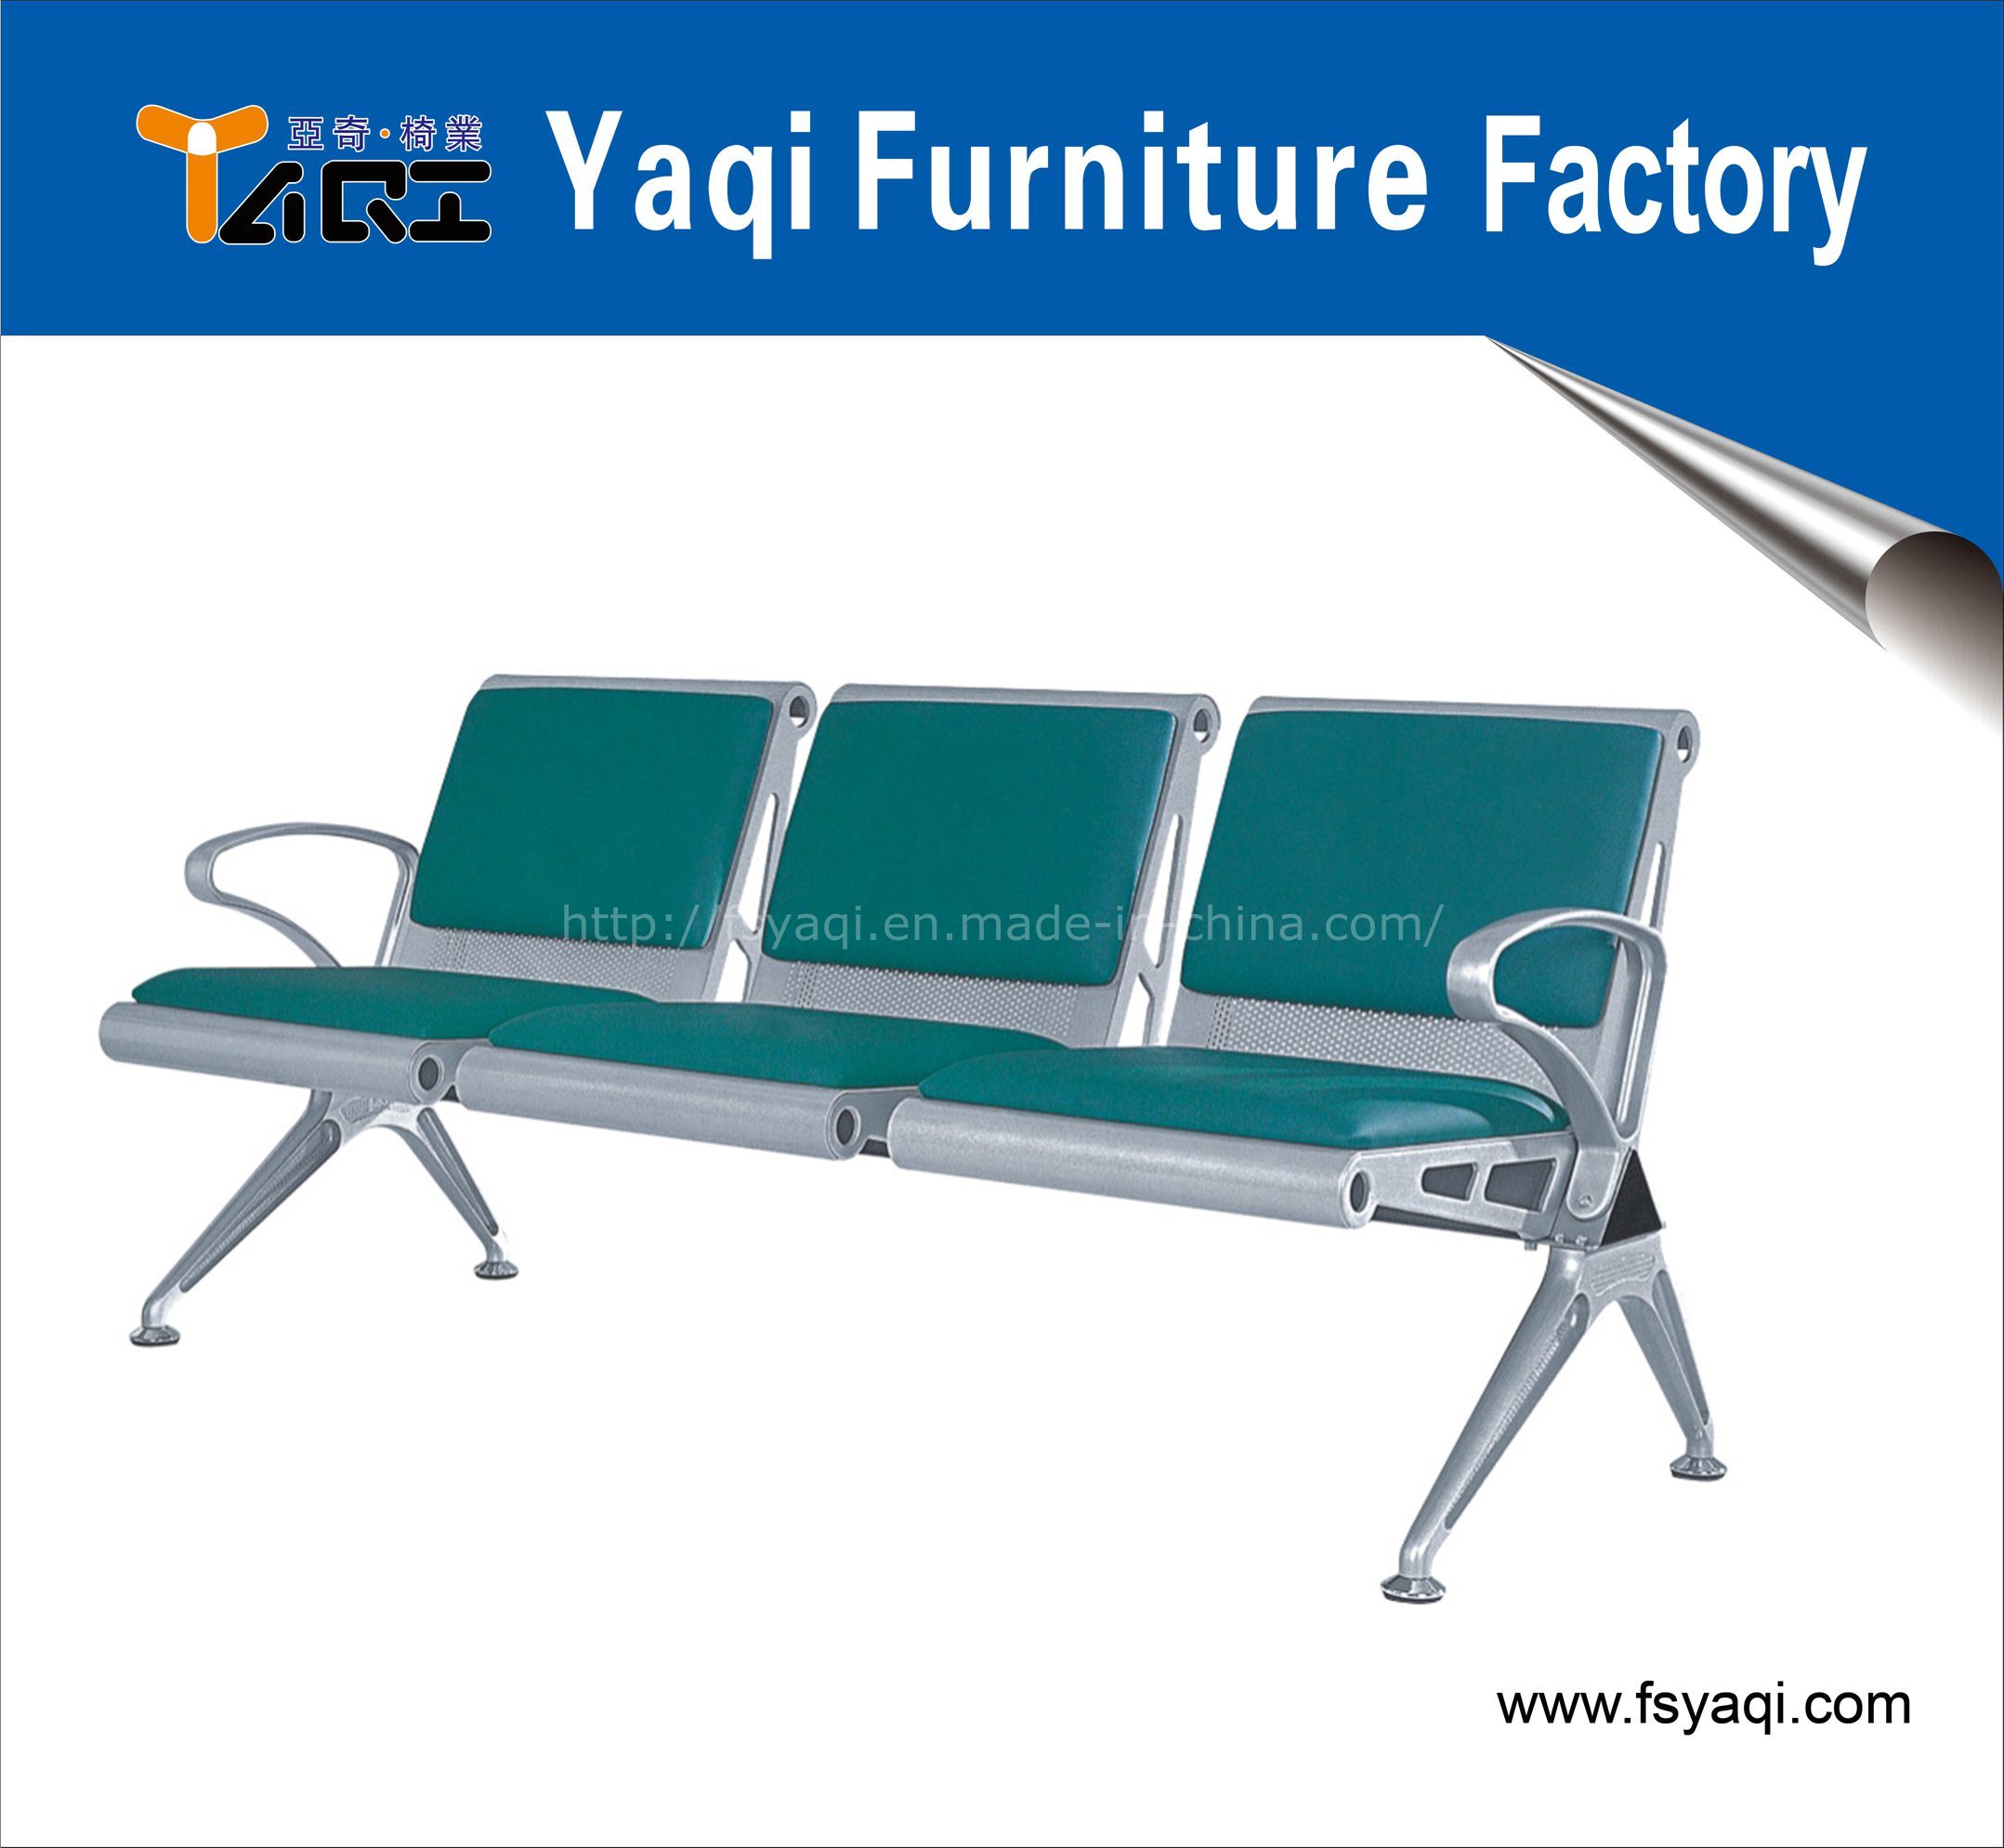 3-Seater Steel Waiting Chair with Cushion for Airport Hospital Station Chair (YA-35B)